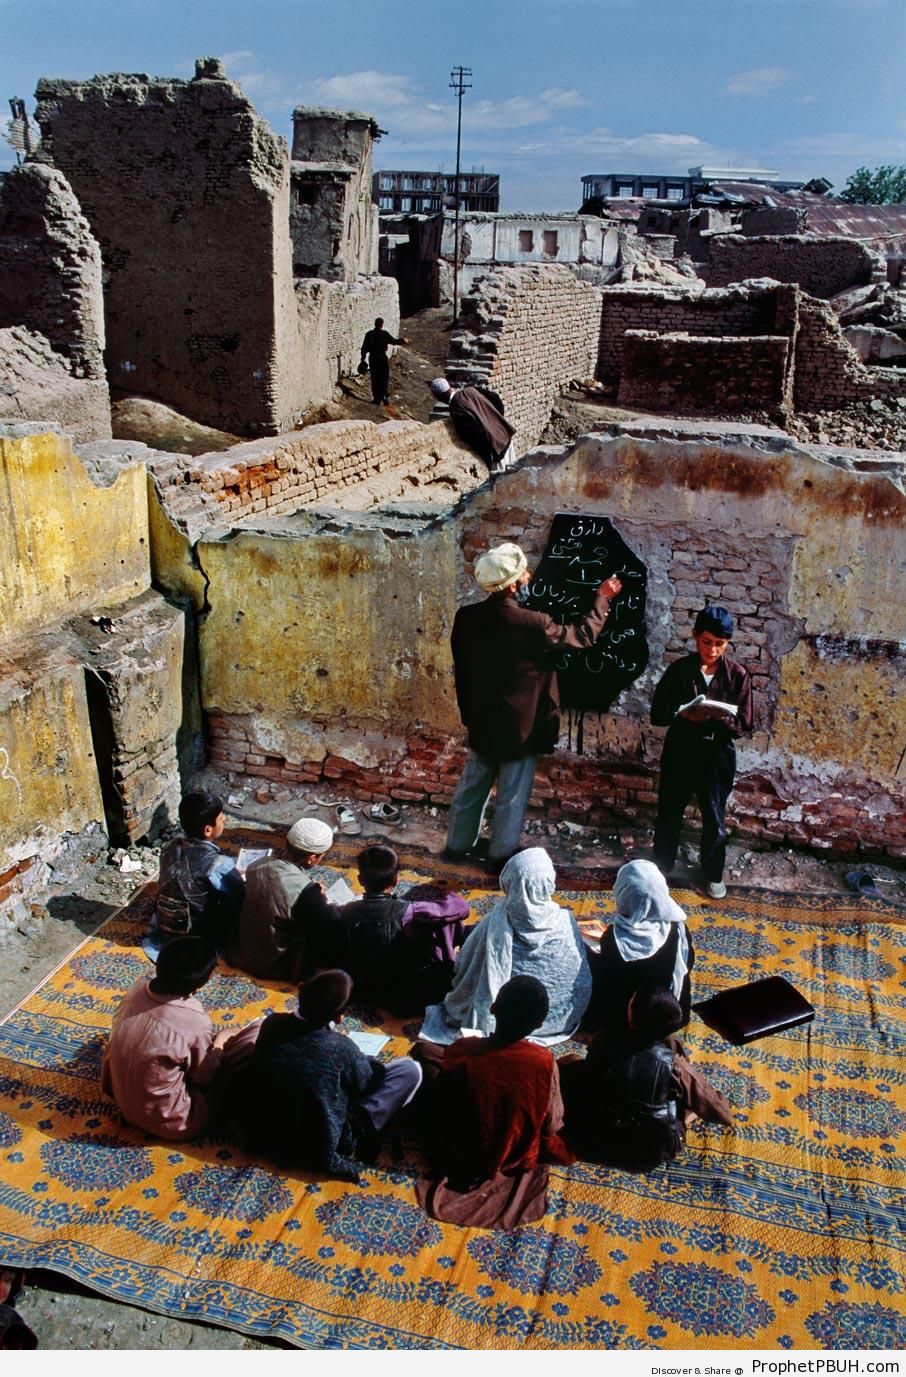 Afghan Children Attending Class in Ruins (Kabul, Afghanistan) - Muslimah Photos (Girls and Women & Hijab Photos) -